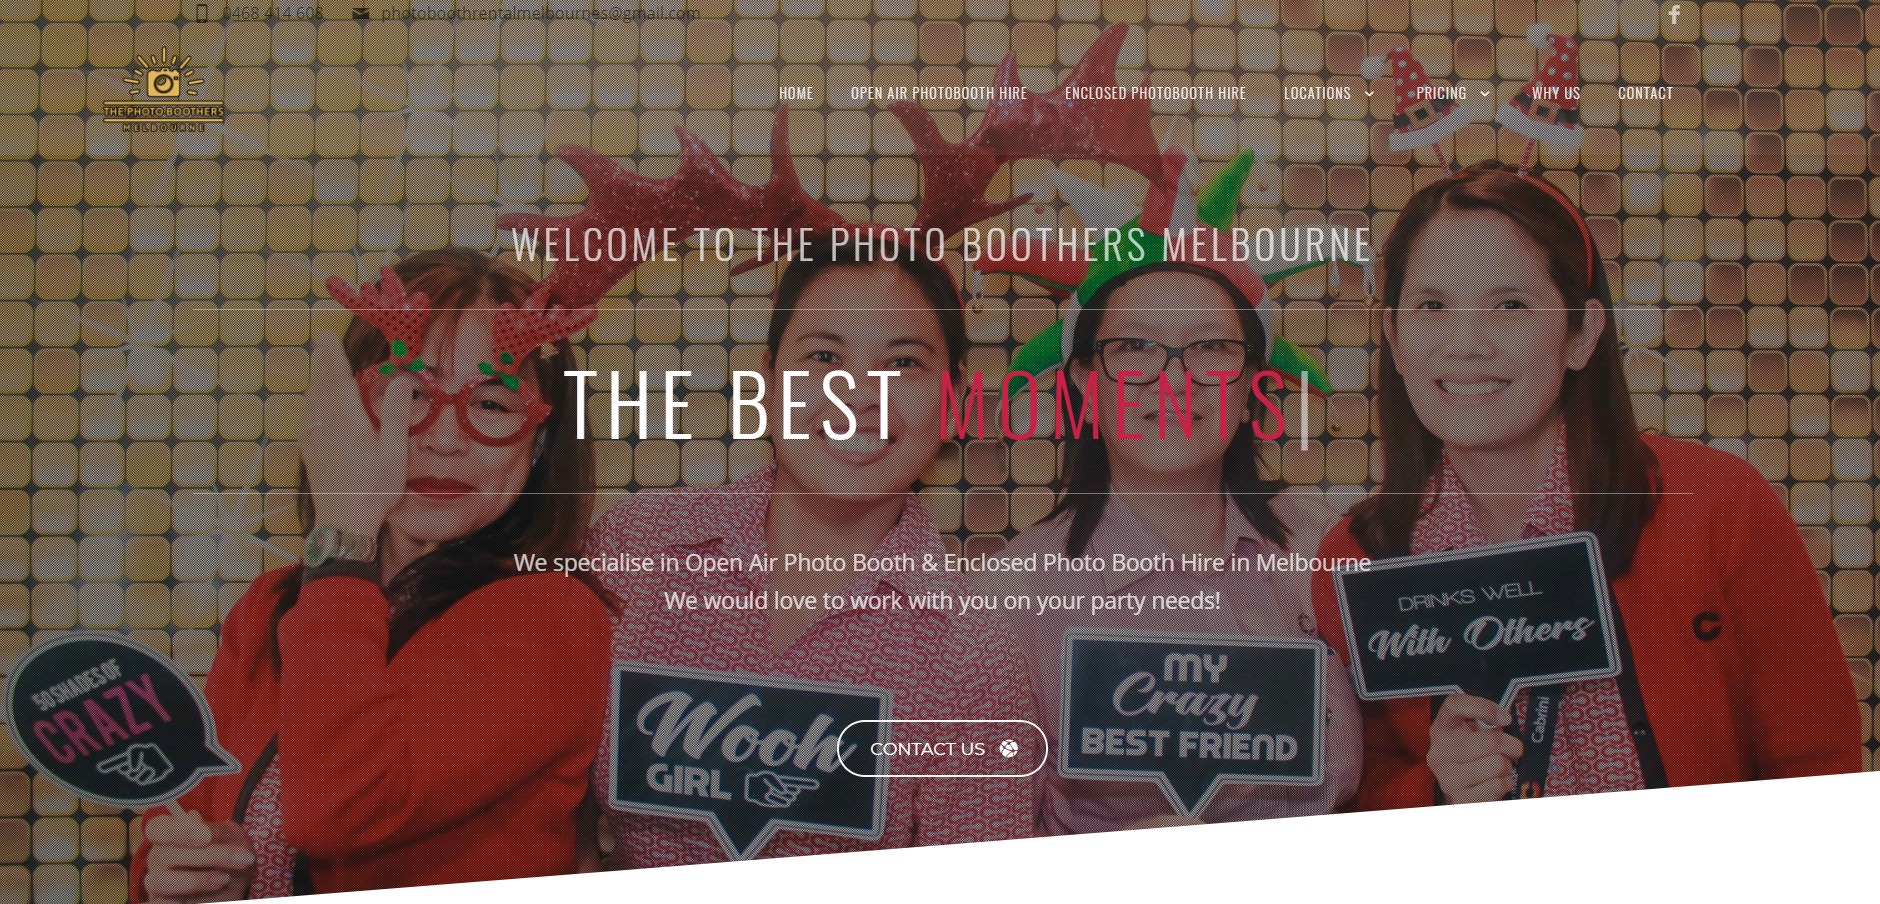 The Photoboothers Melbourne